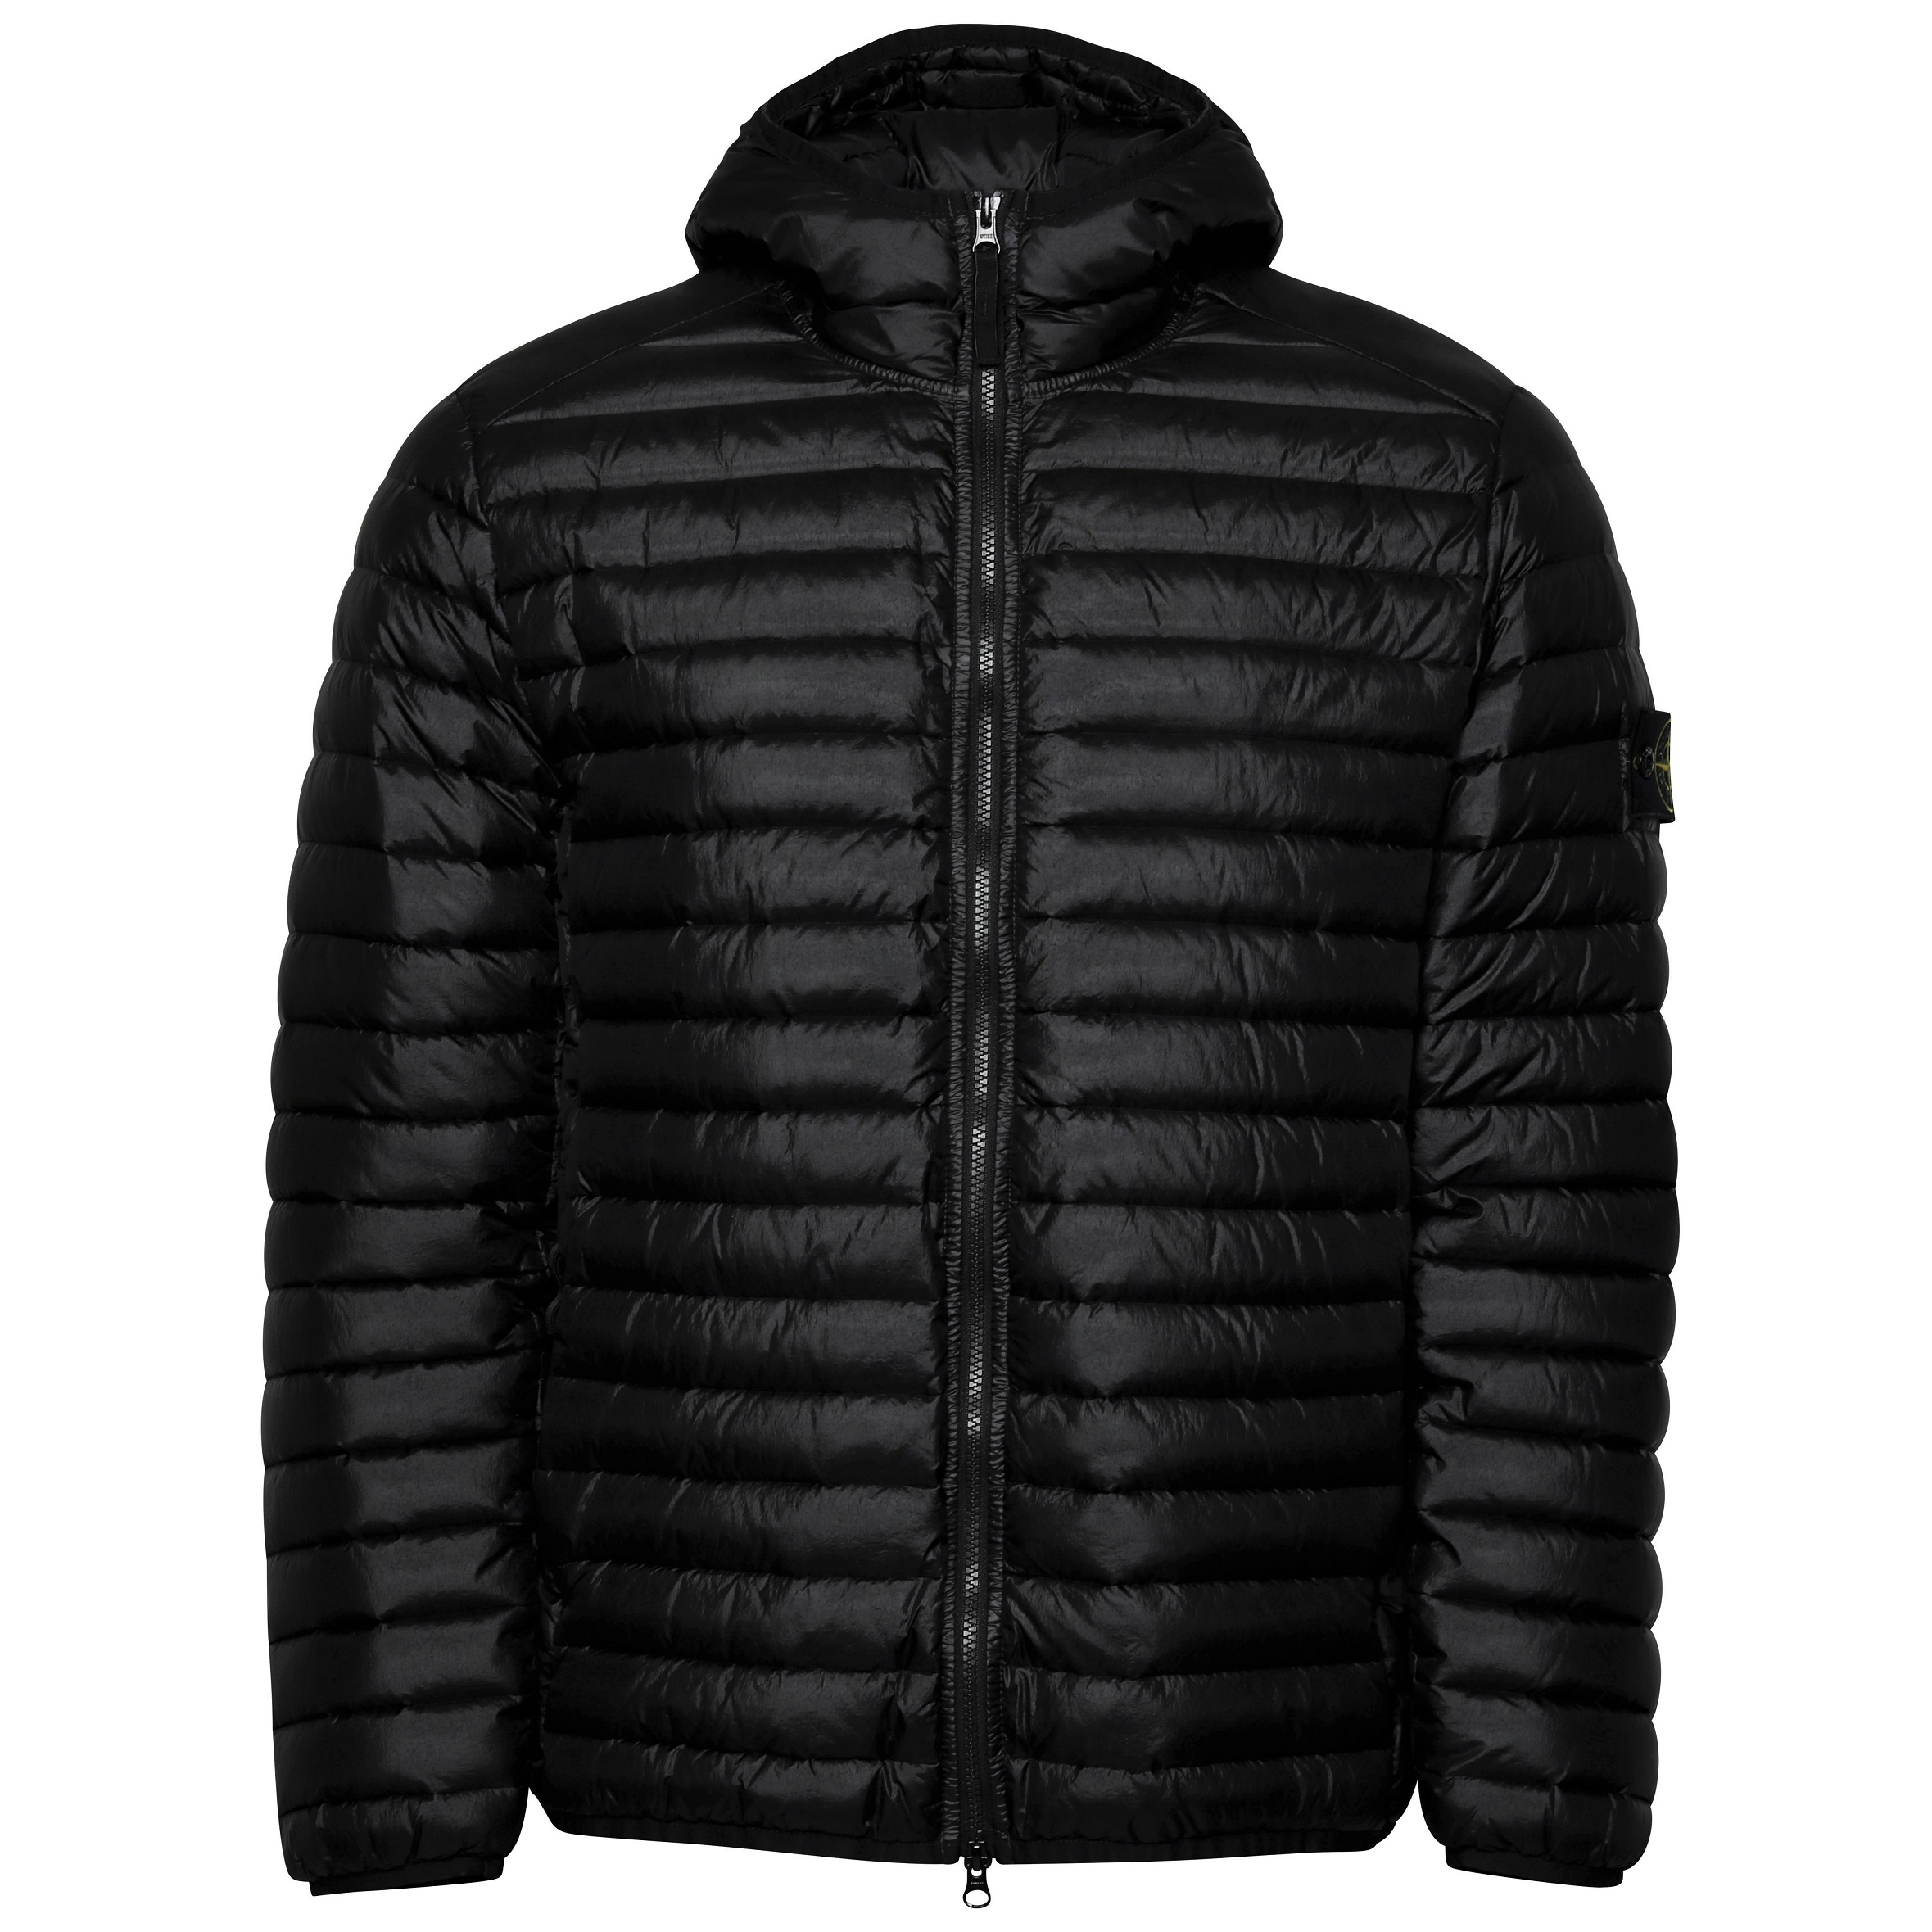 Stone Island Hooded Real Down Jacket in Black 3XL